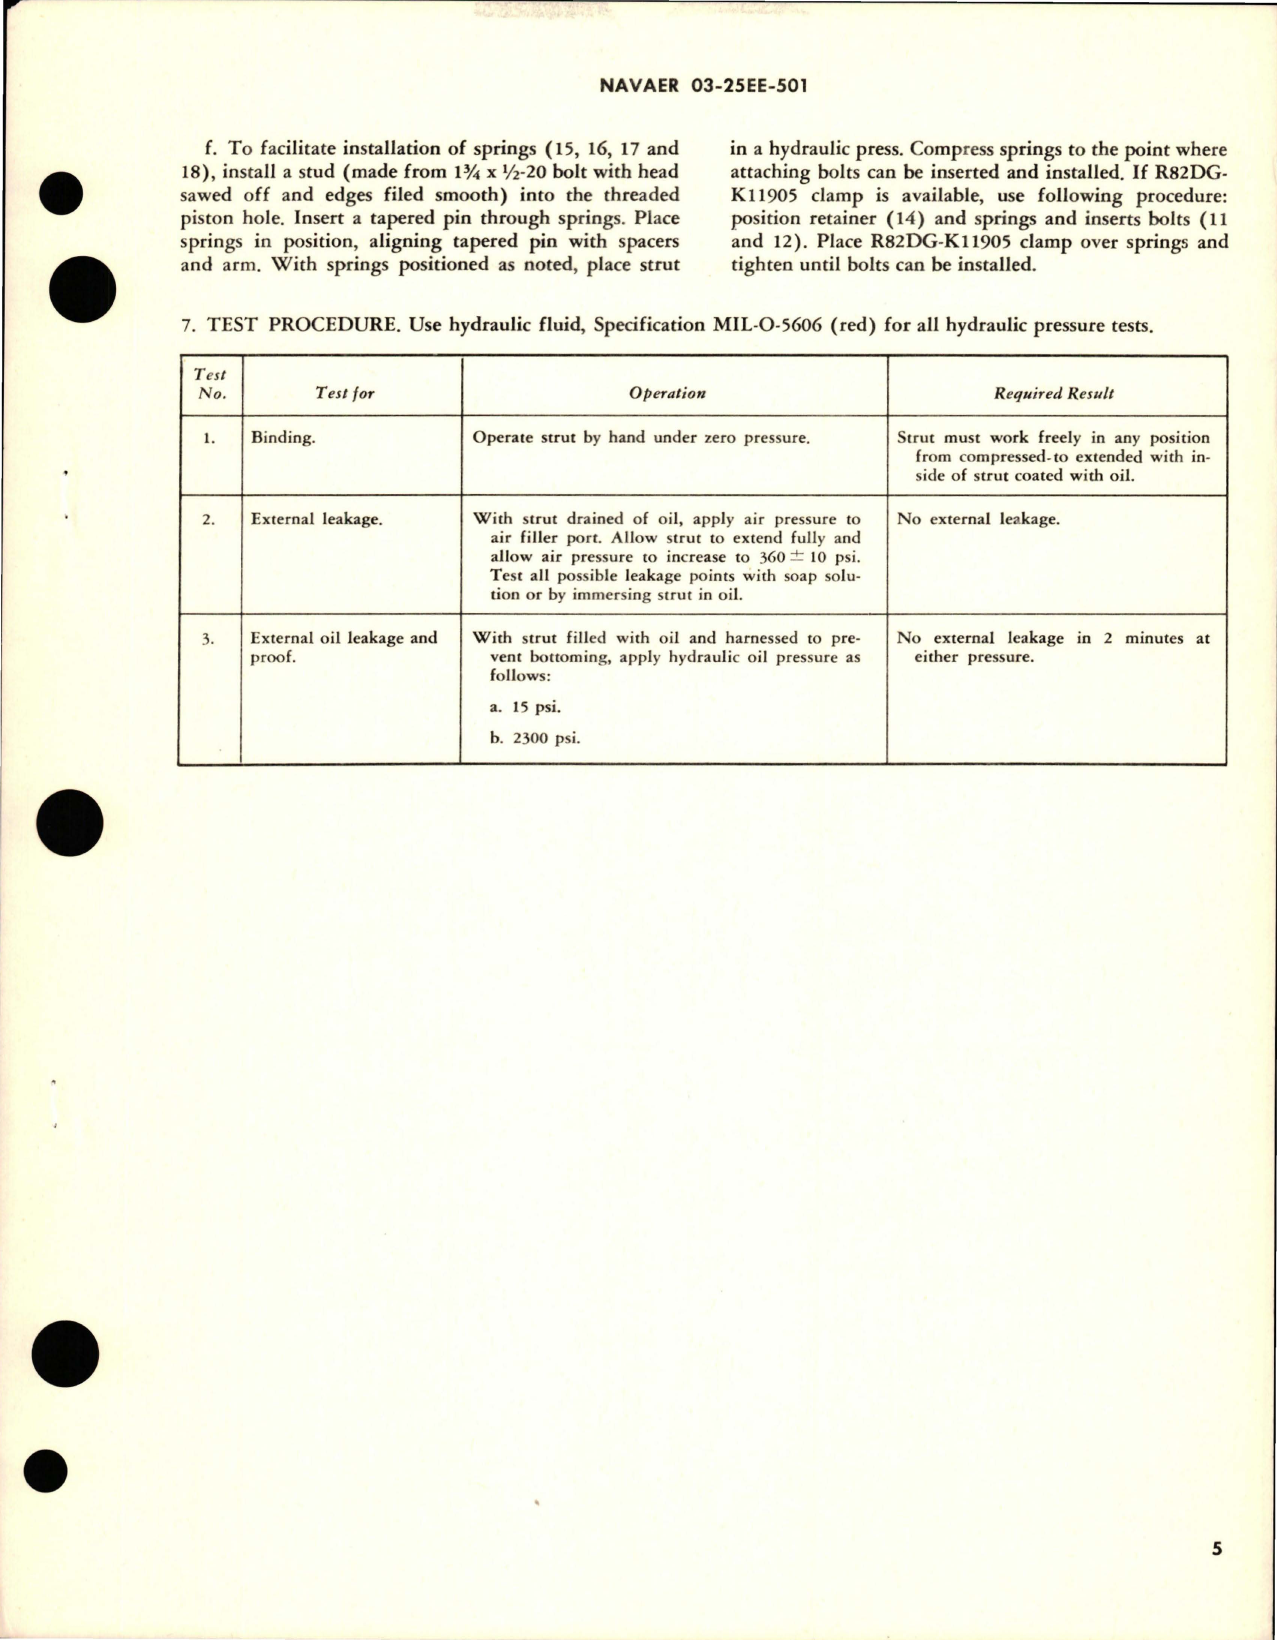 Sample page 5 from AirCorps Library document: Overhaul Instructions with Parts Breakdown for Nose Landing Gear Shock Strut Assembly - 5260054-512 and 5260054-514